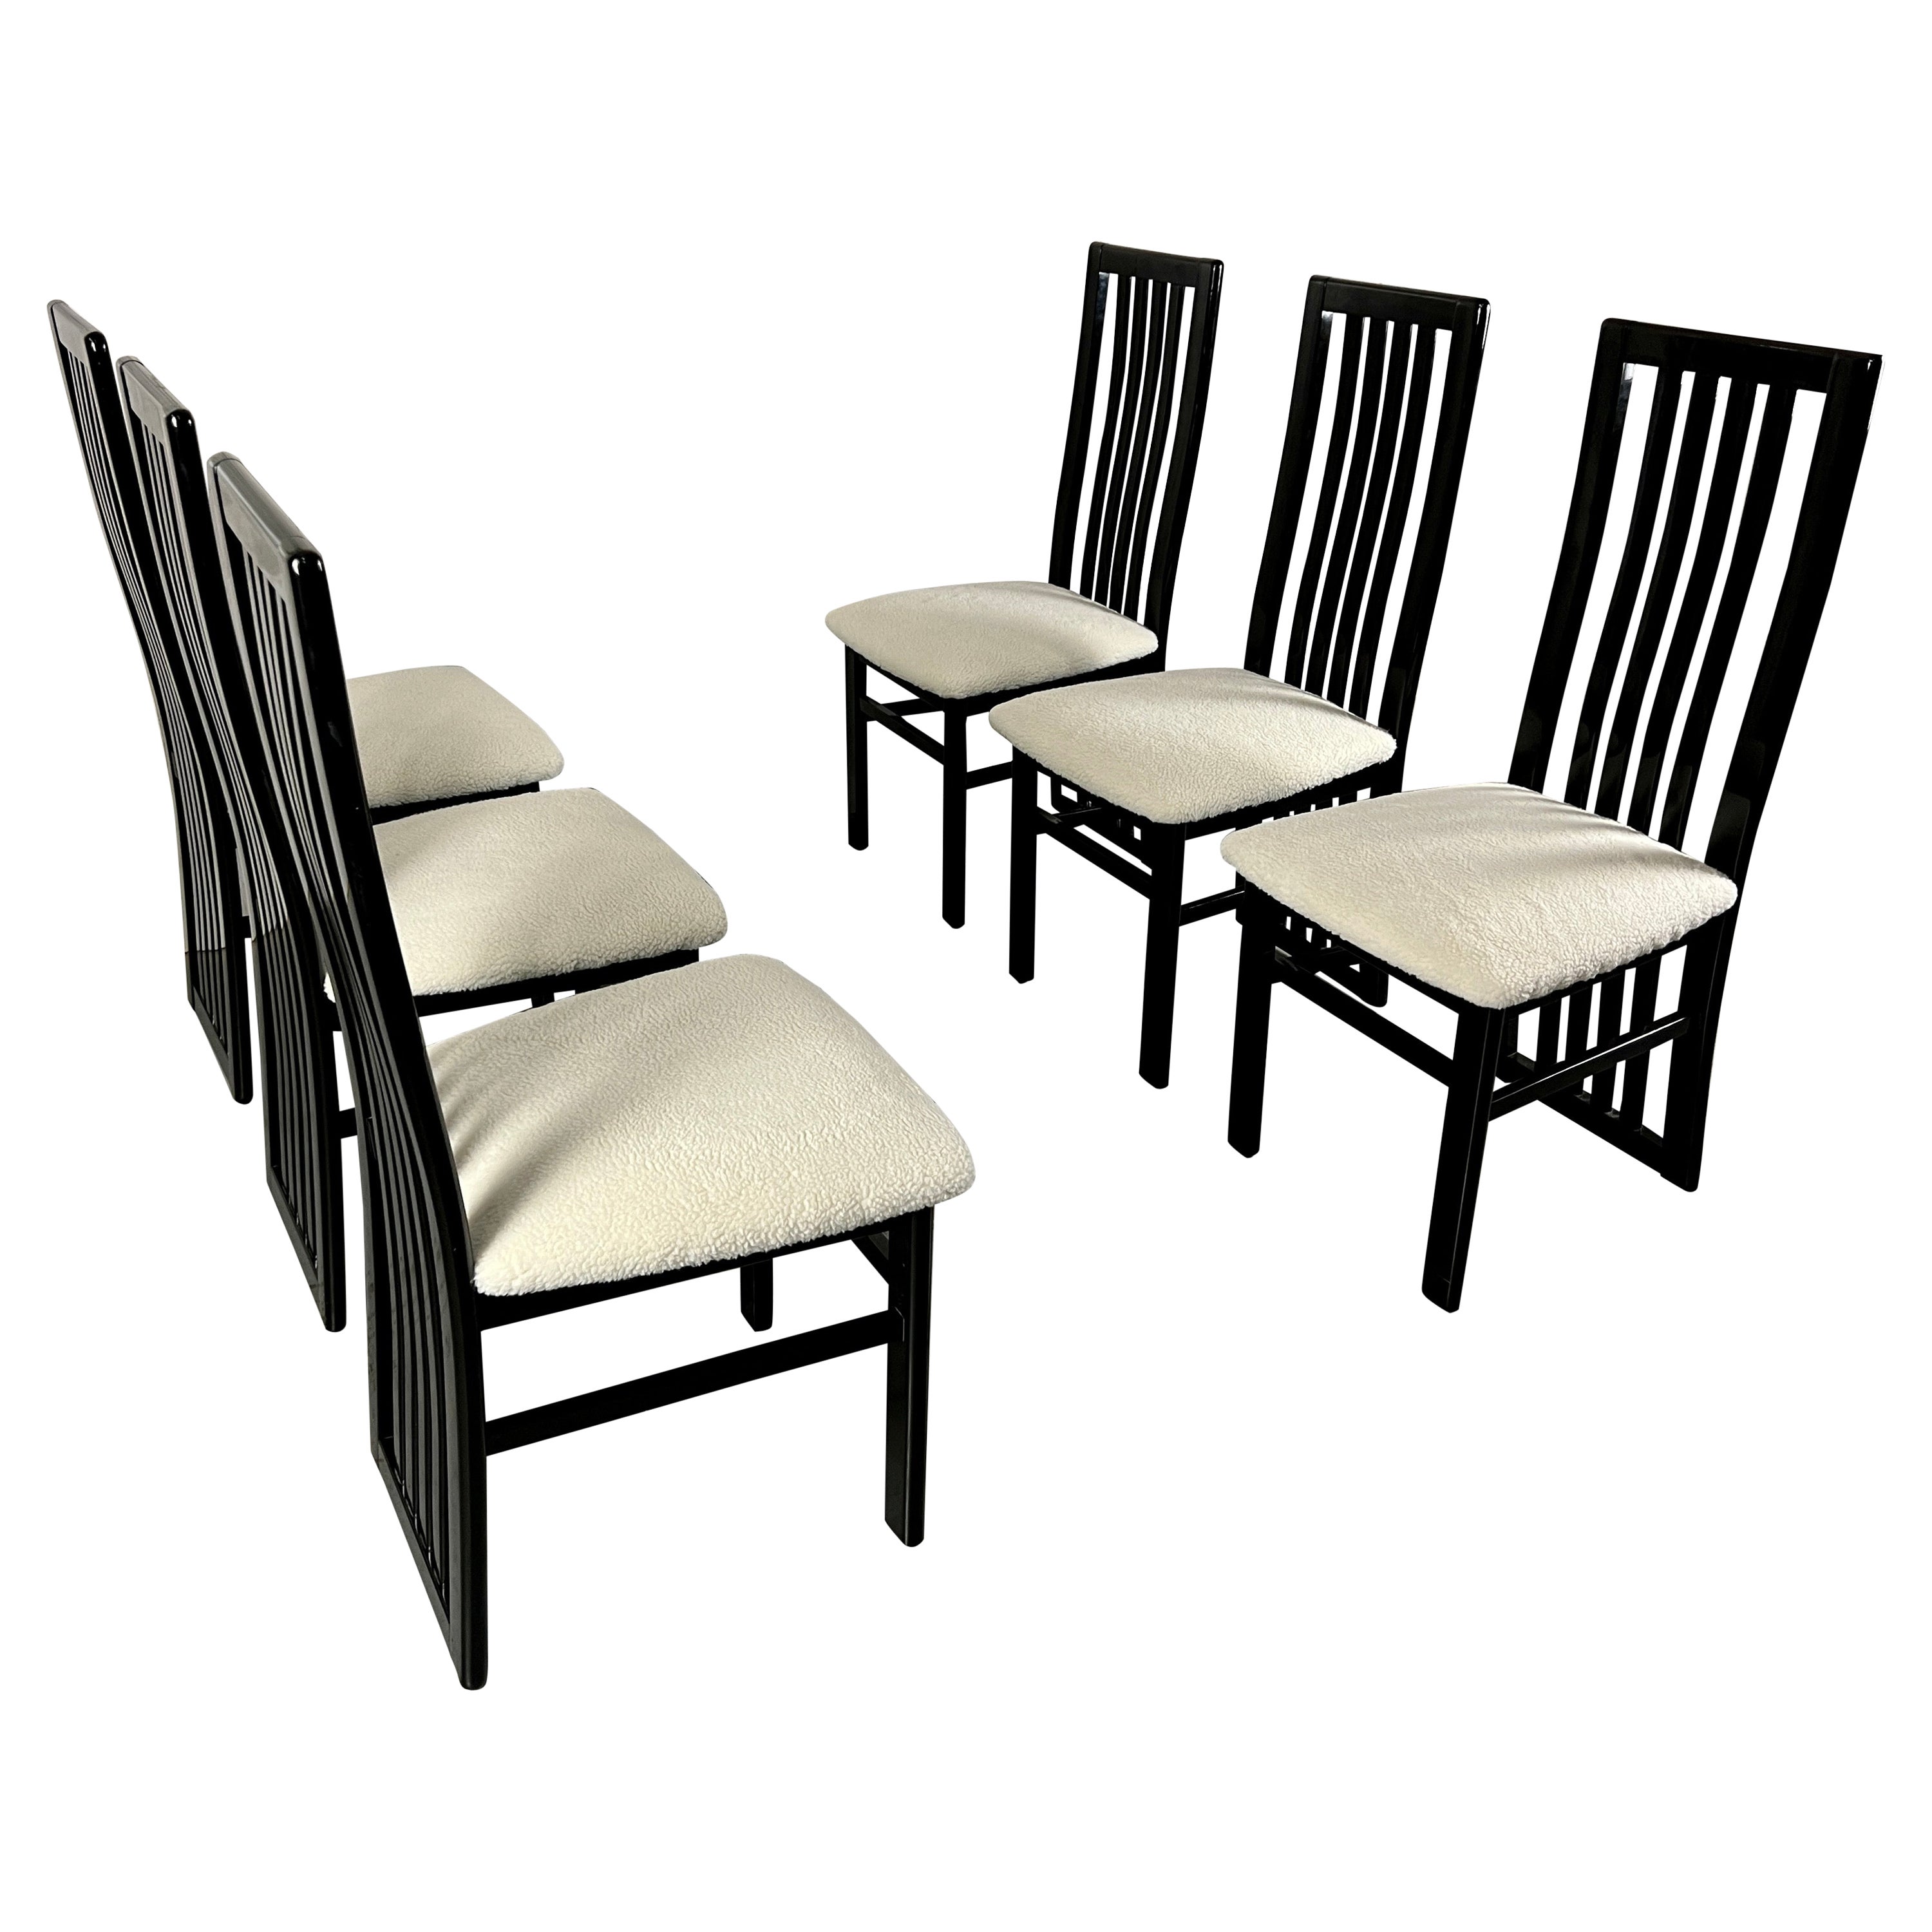 Italian Black Lacquer Dining Chairs by S.P.a Tonon